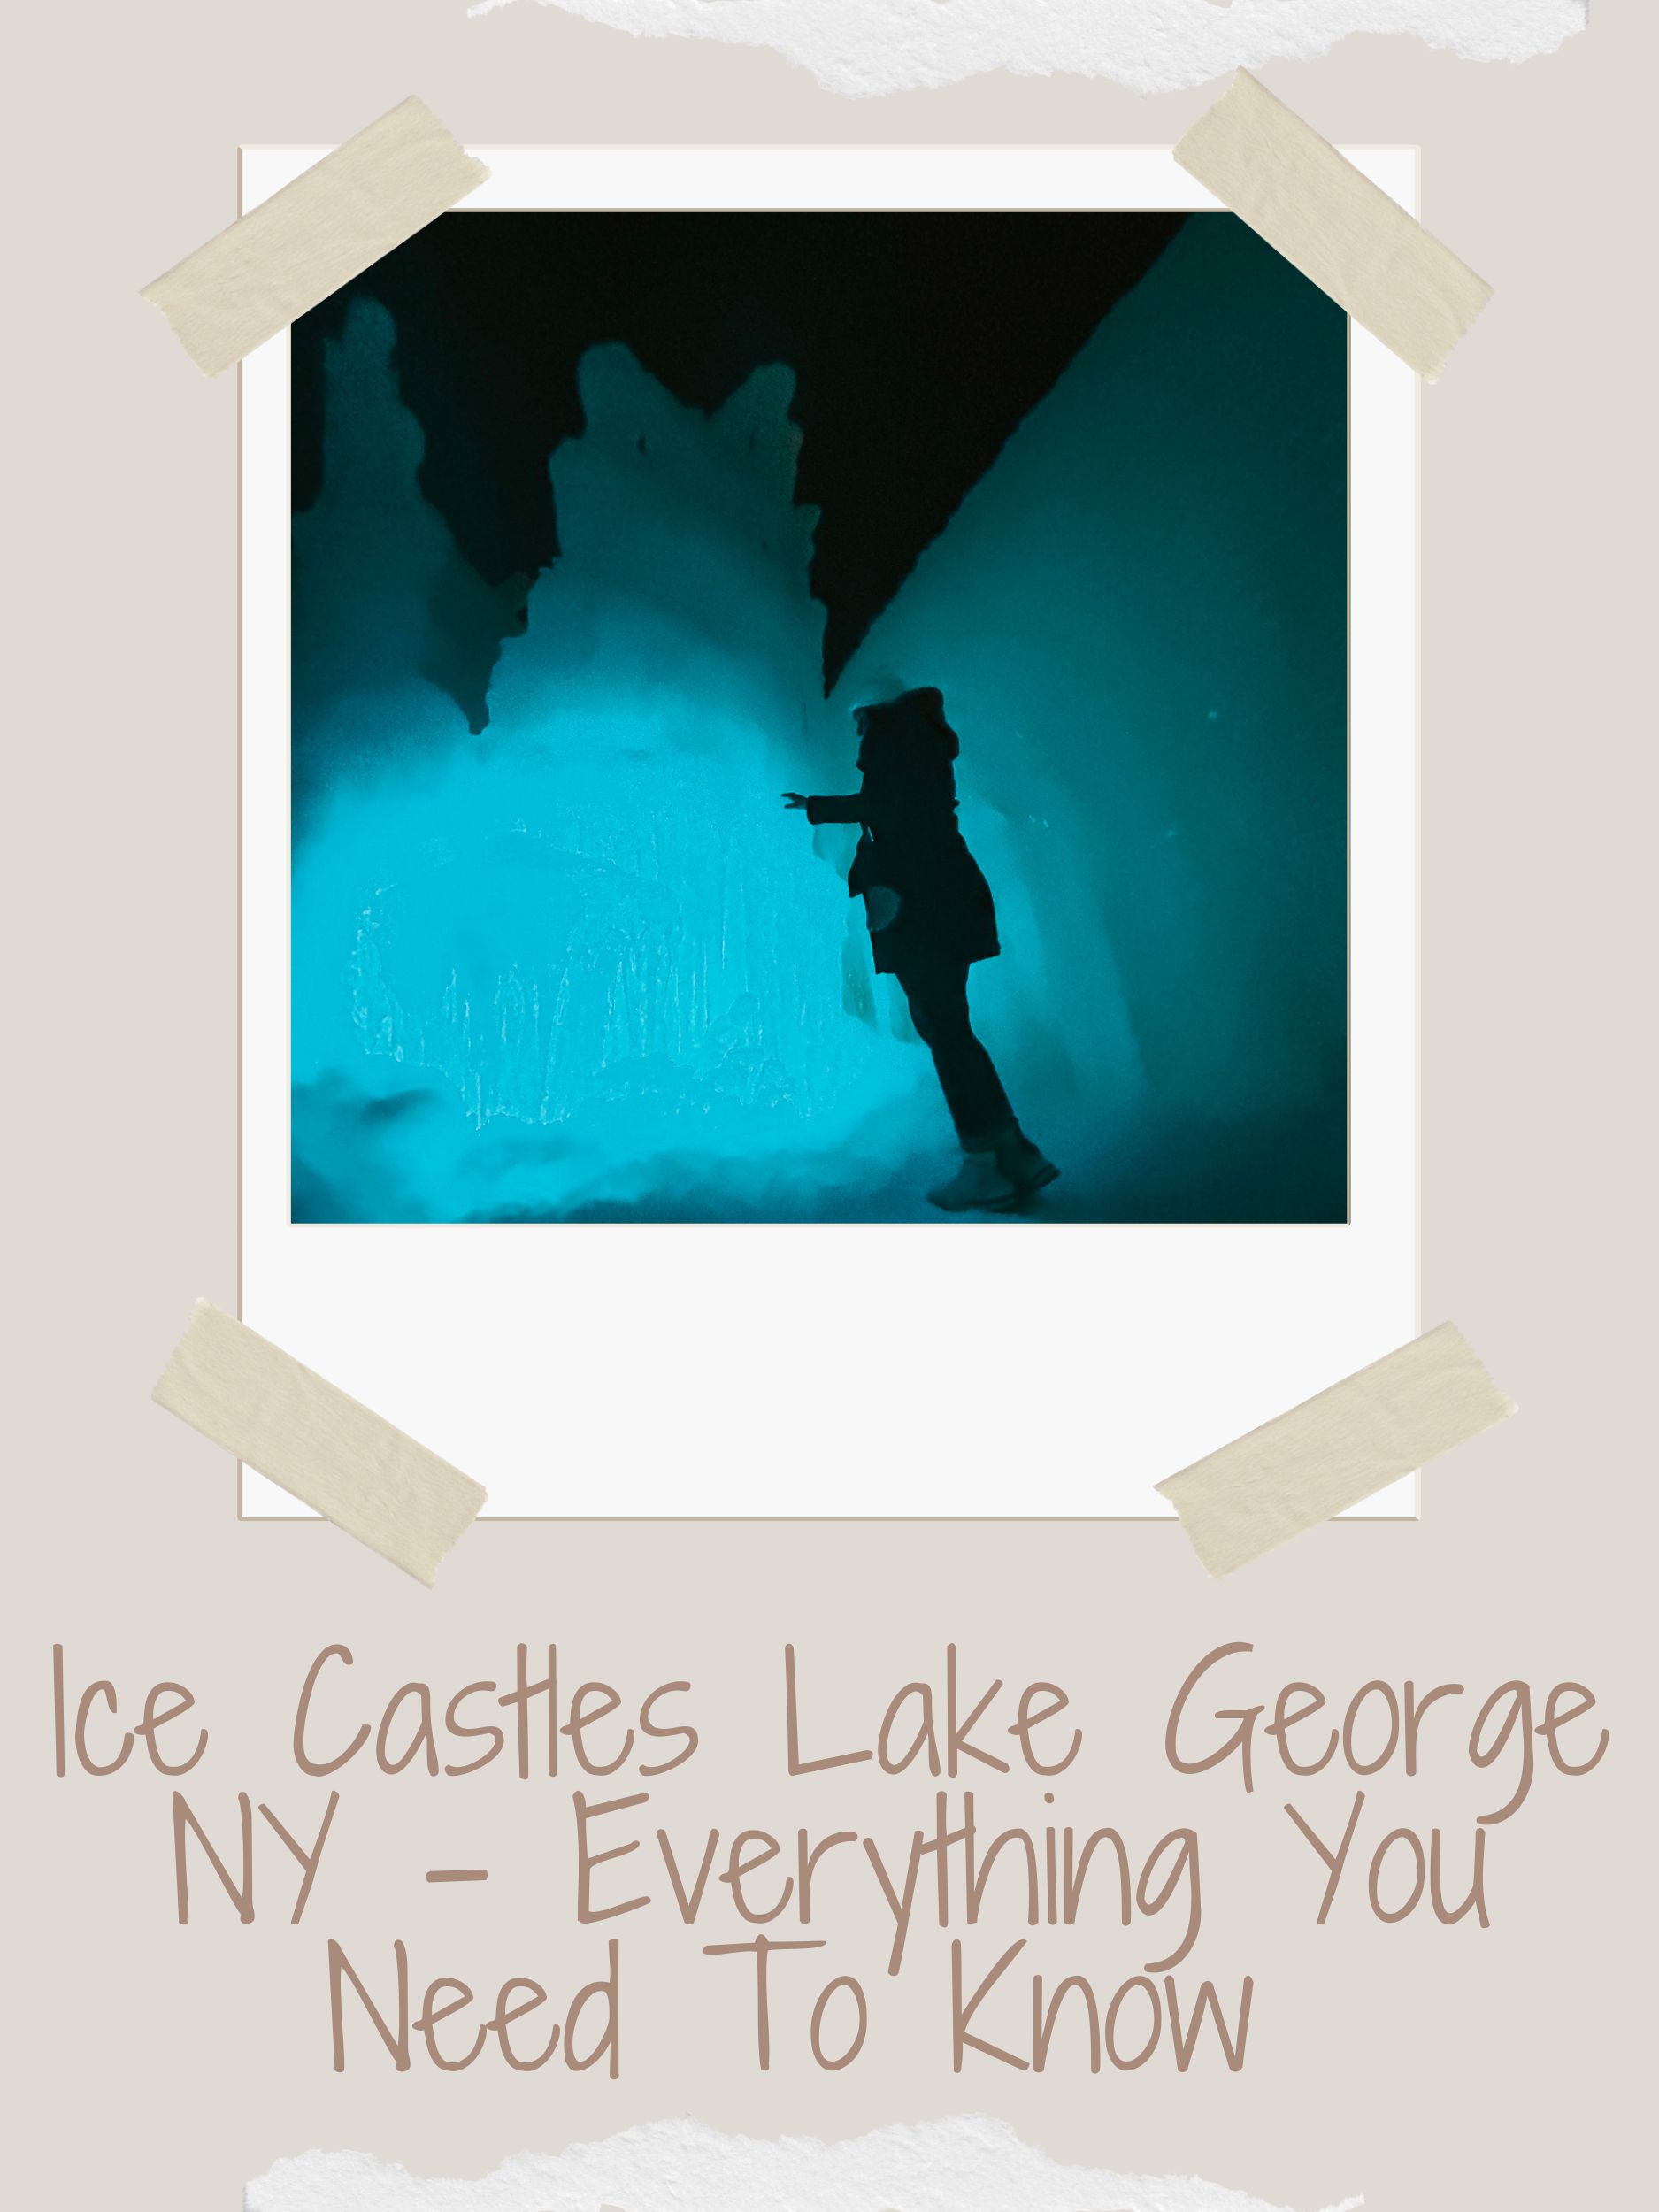 Ice Castles Lake George NY – Everything You Need To Know